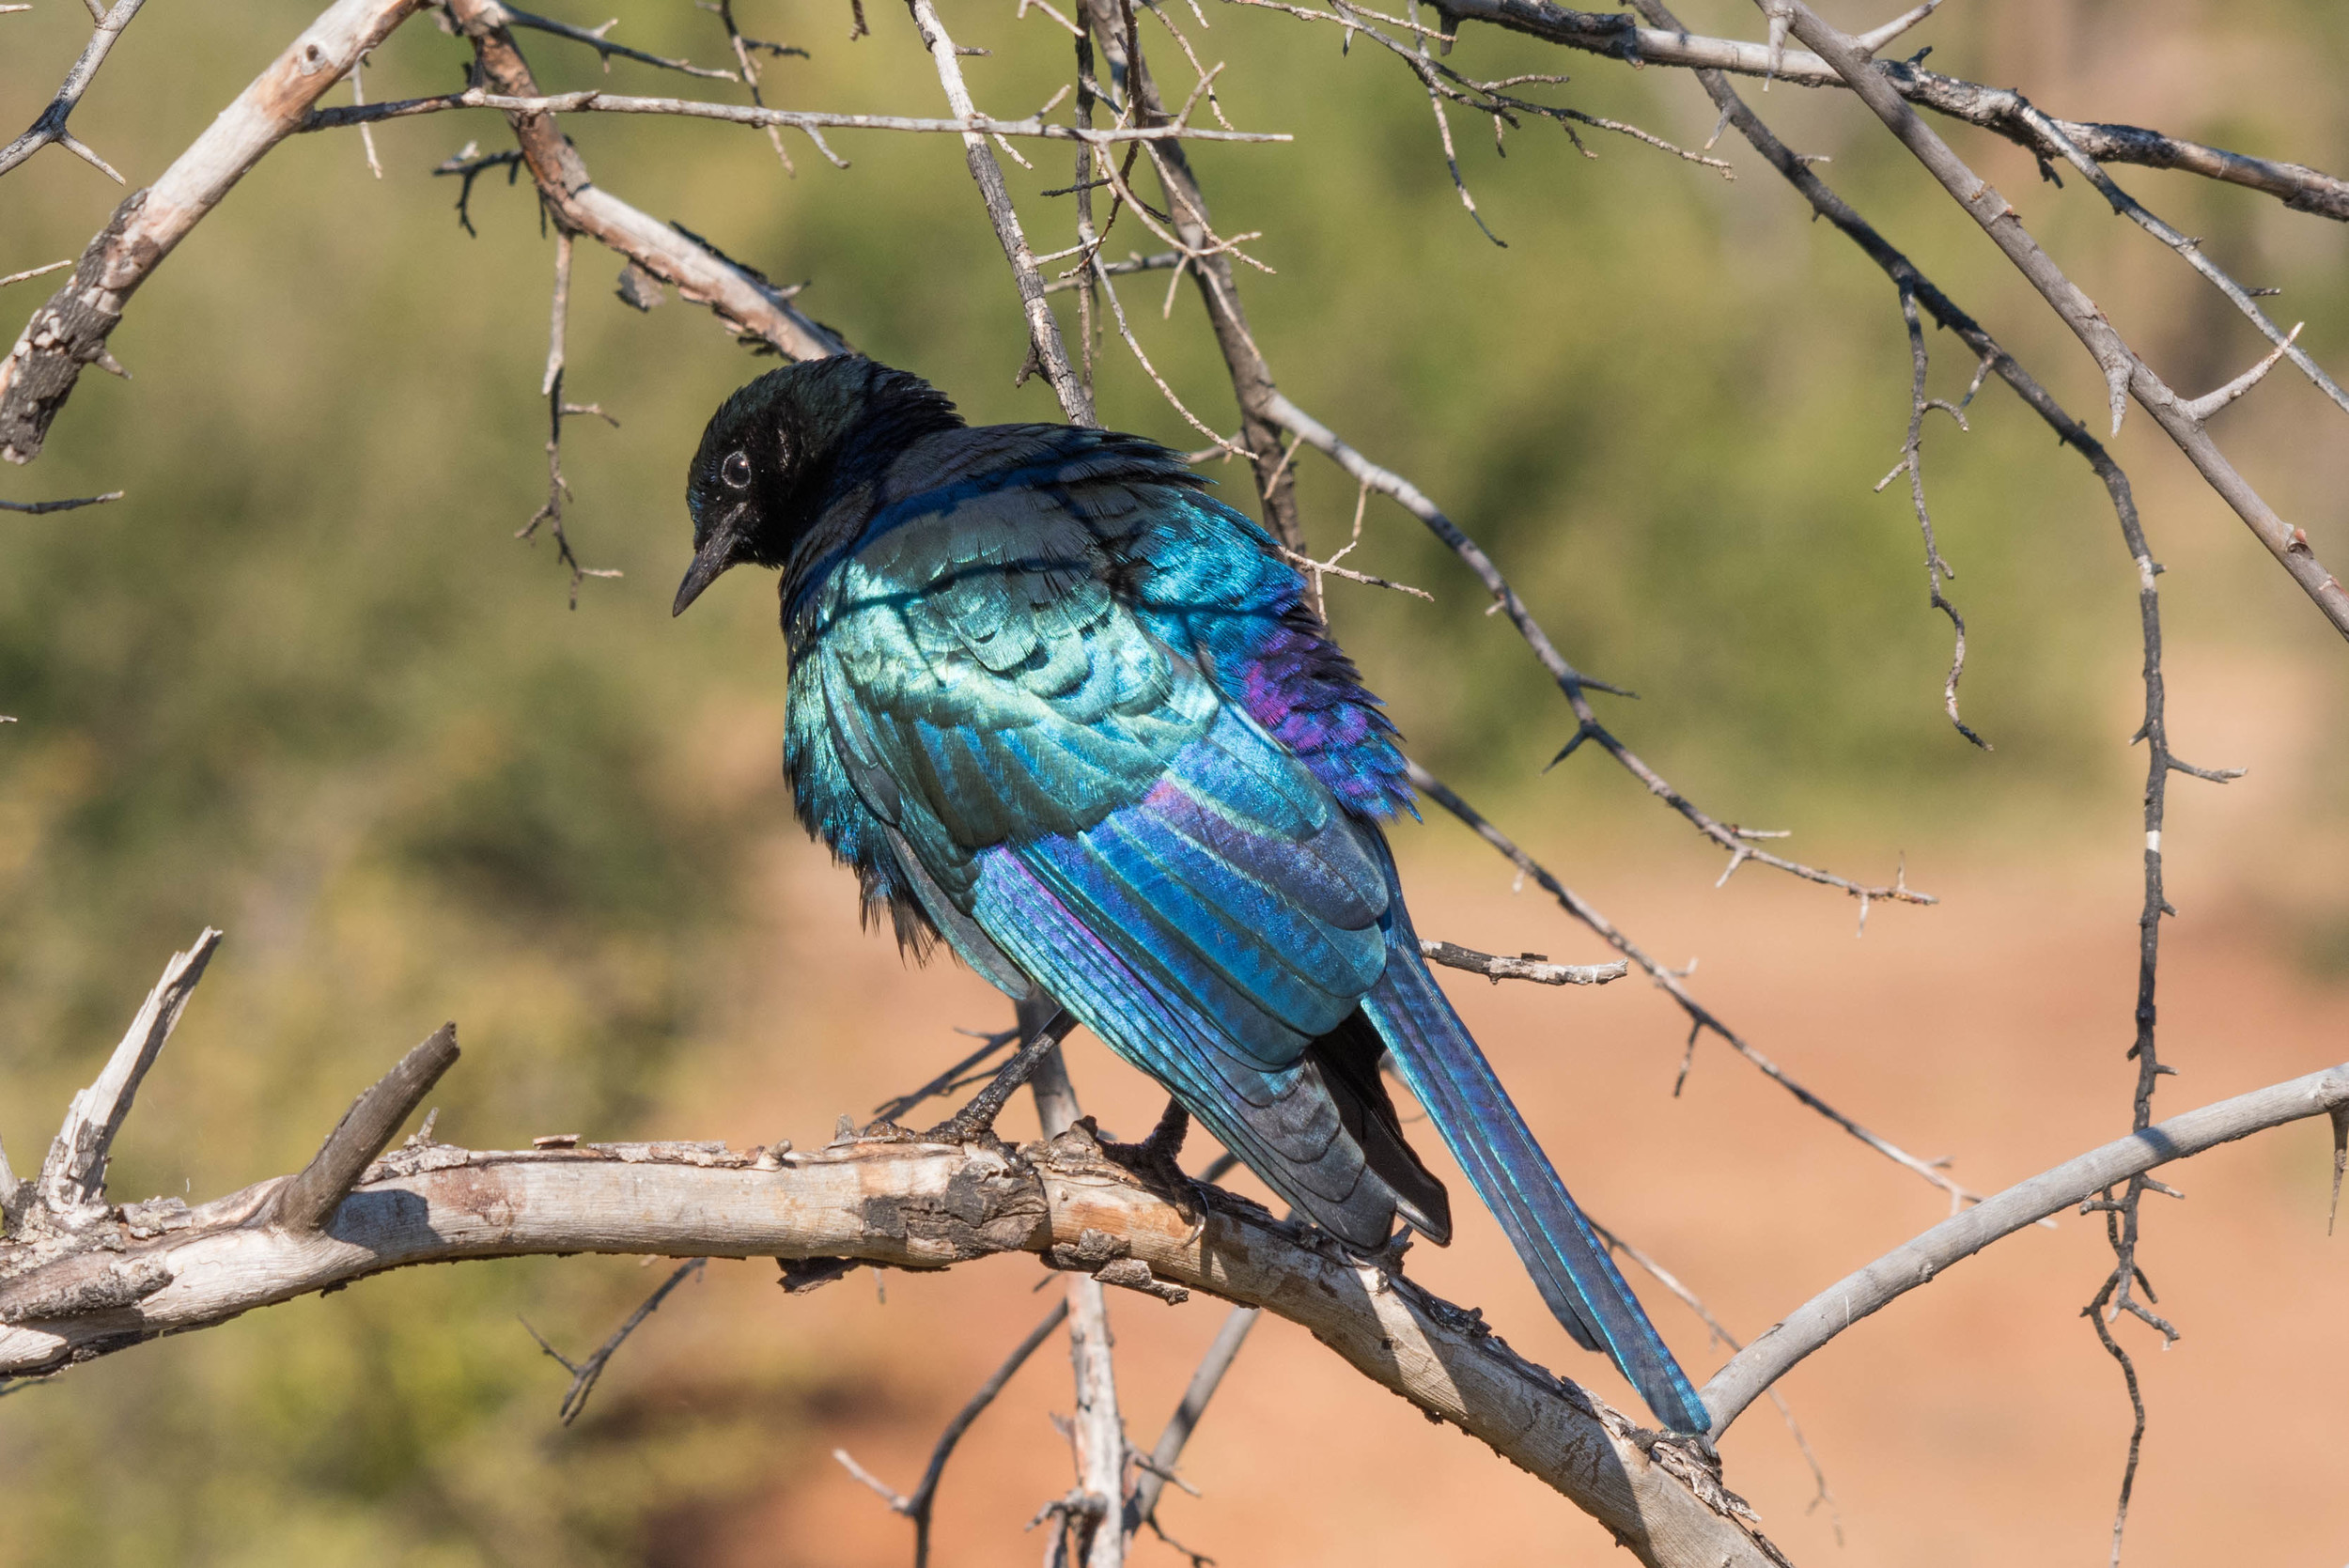 Starling, Madikwe Game Reserve, South Africa